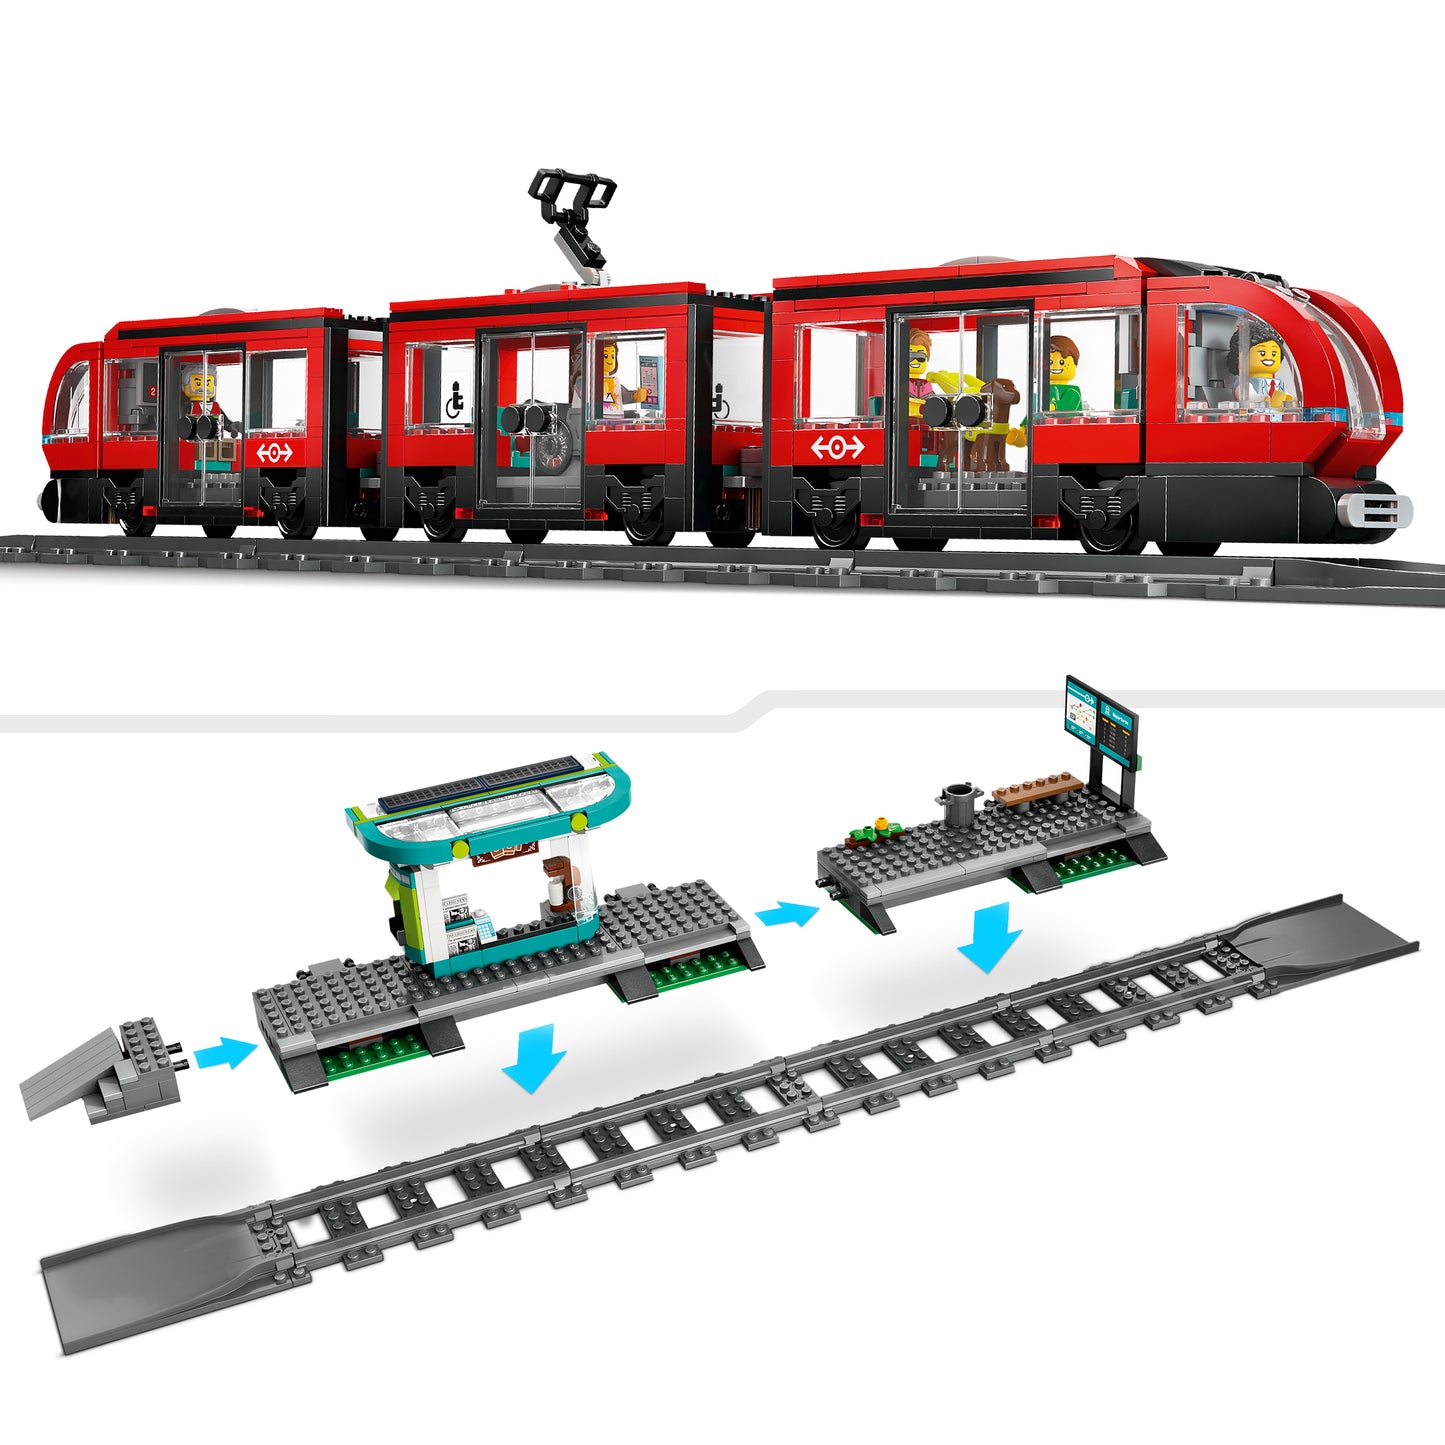 LEGO City Tram and Station 60423 City (Pre-Order: expected August)